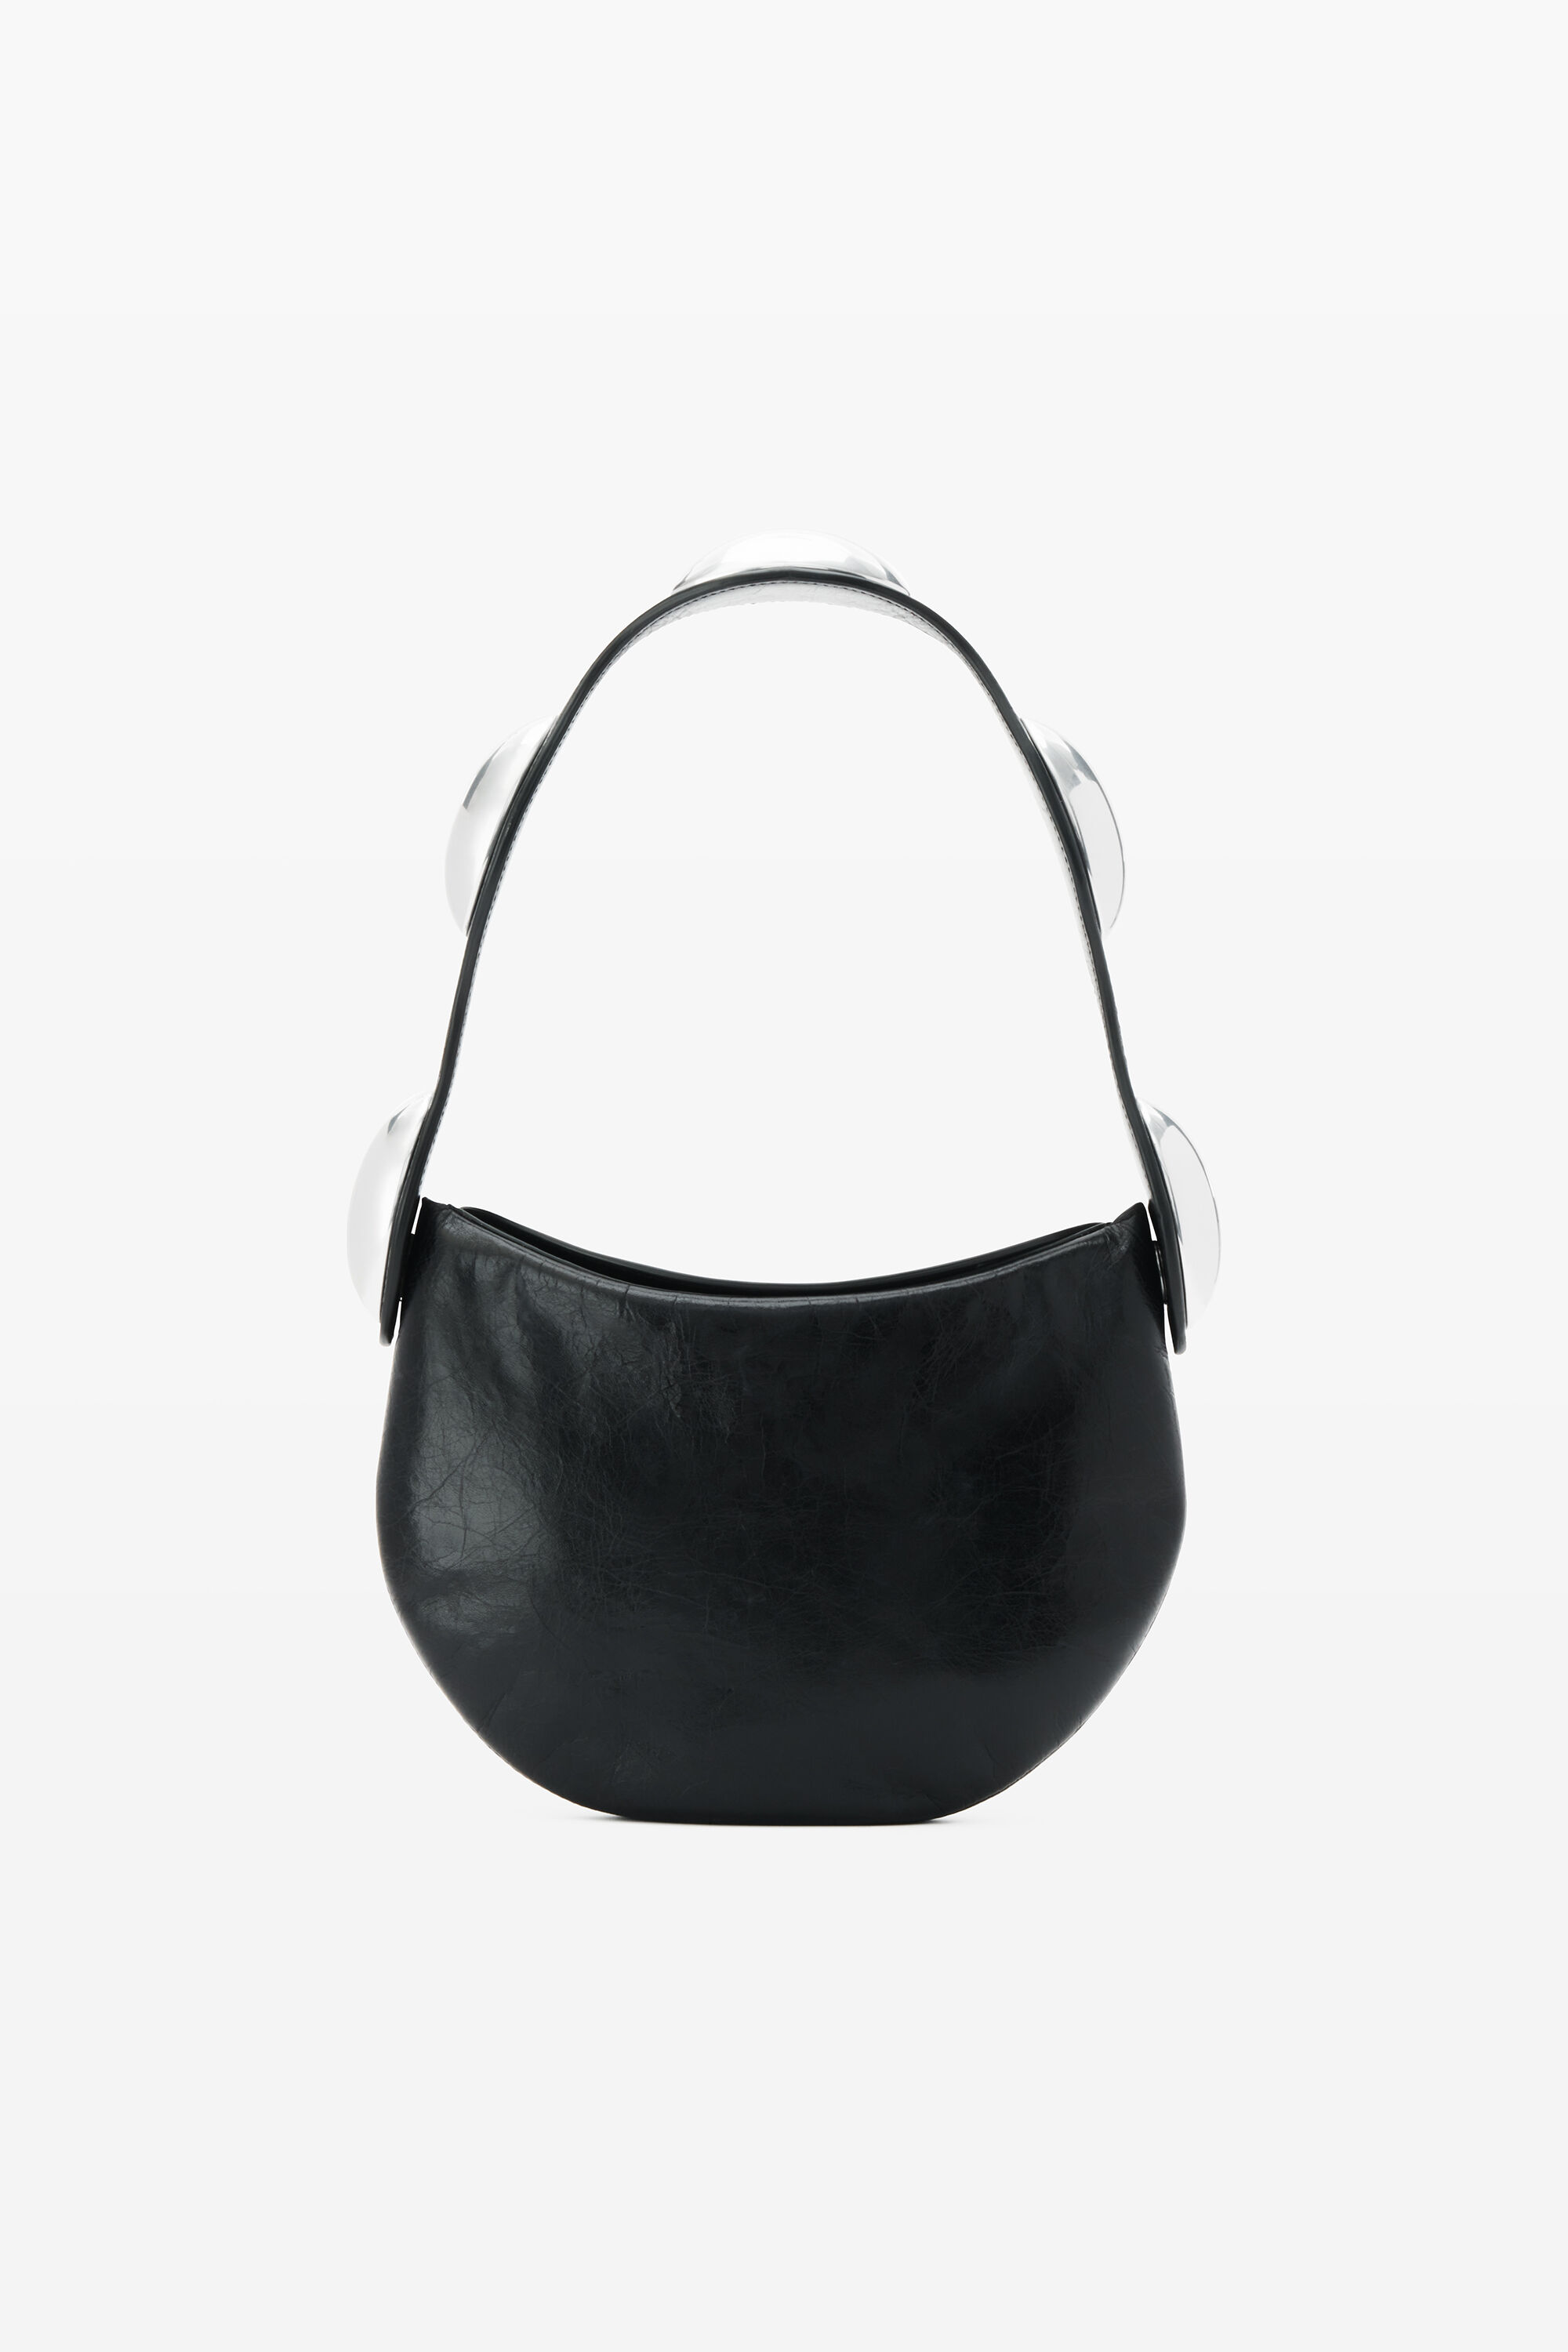 alexanderwang dome multi carry bag in crackle patent leather BLACK